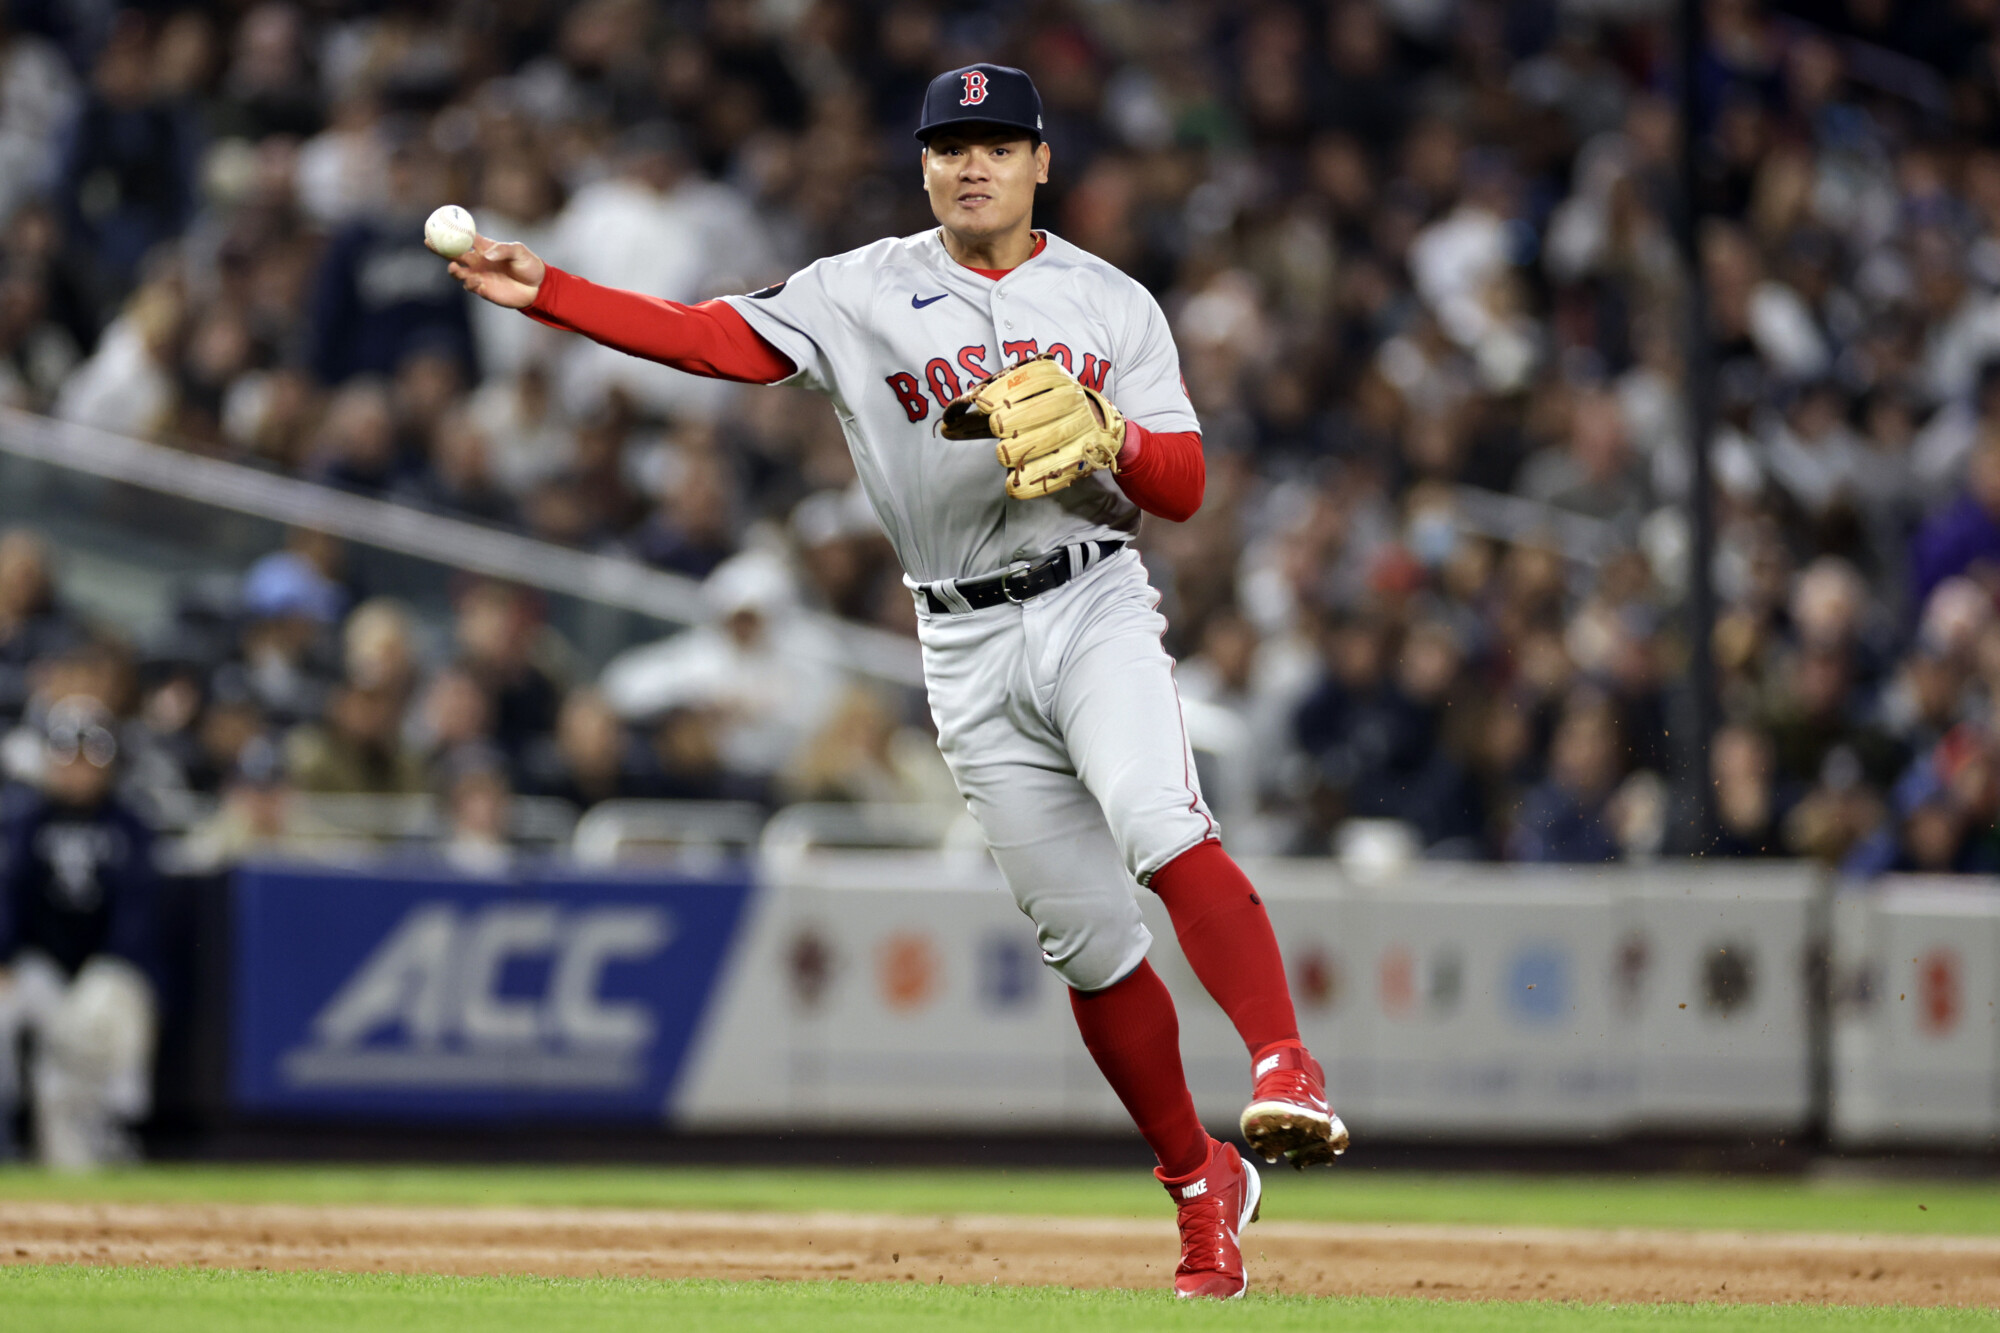 Trevor Story, Bobby Dalbec out of Boston Red Sox lineup for series